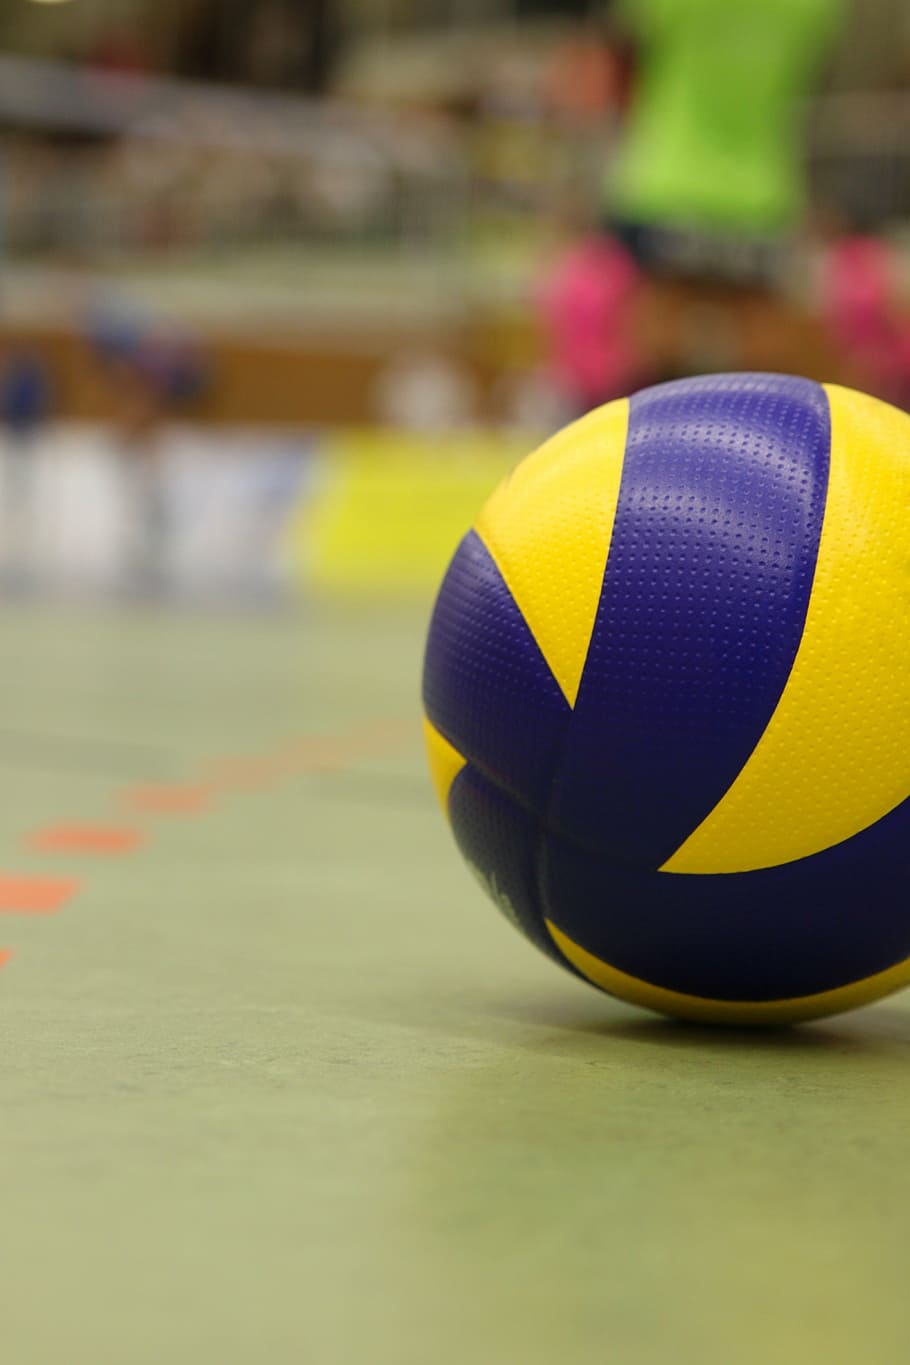 3840x2560 / ball, game, sport, team, theme hobbies, volleyball 4k wallpaper  - Coolwallpapers.me!